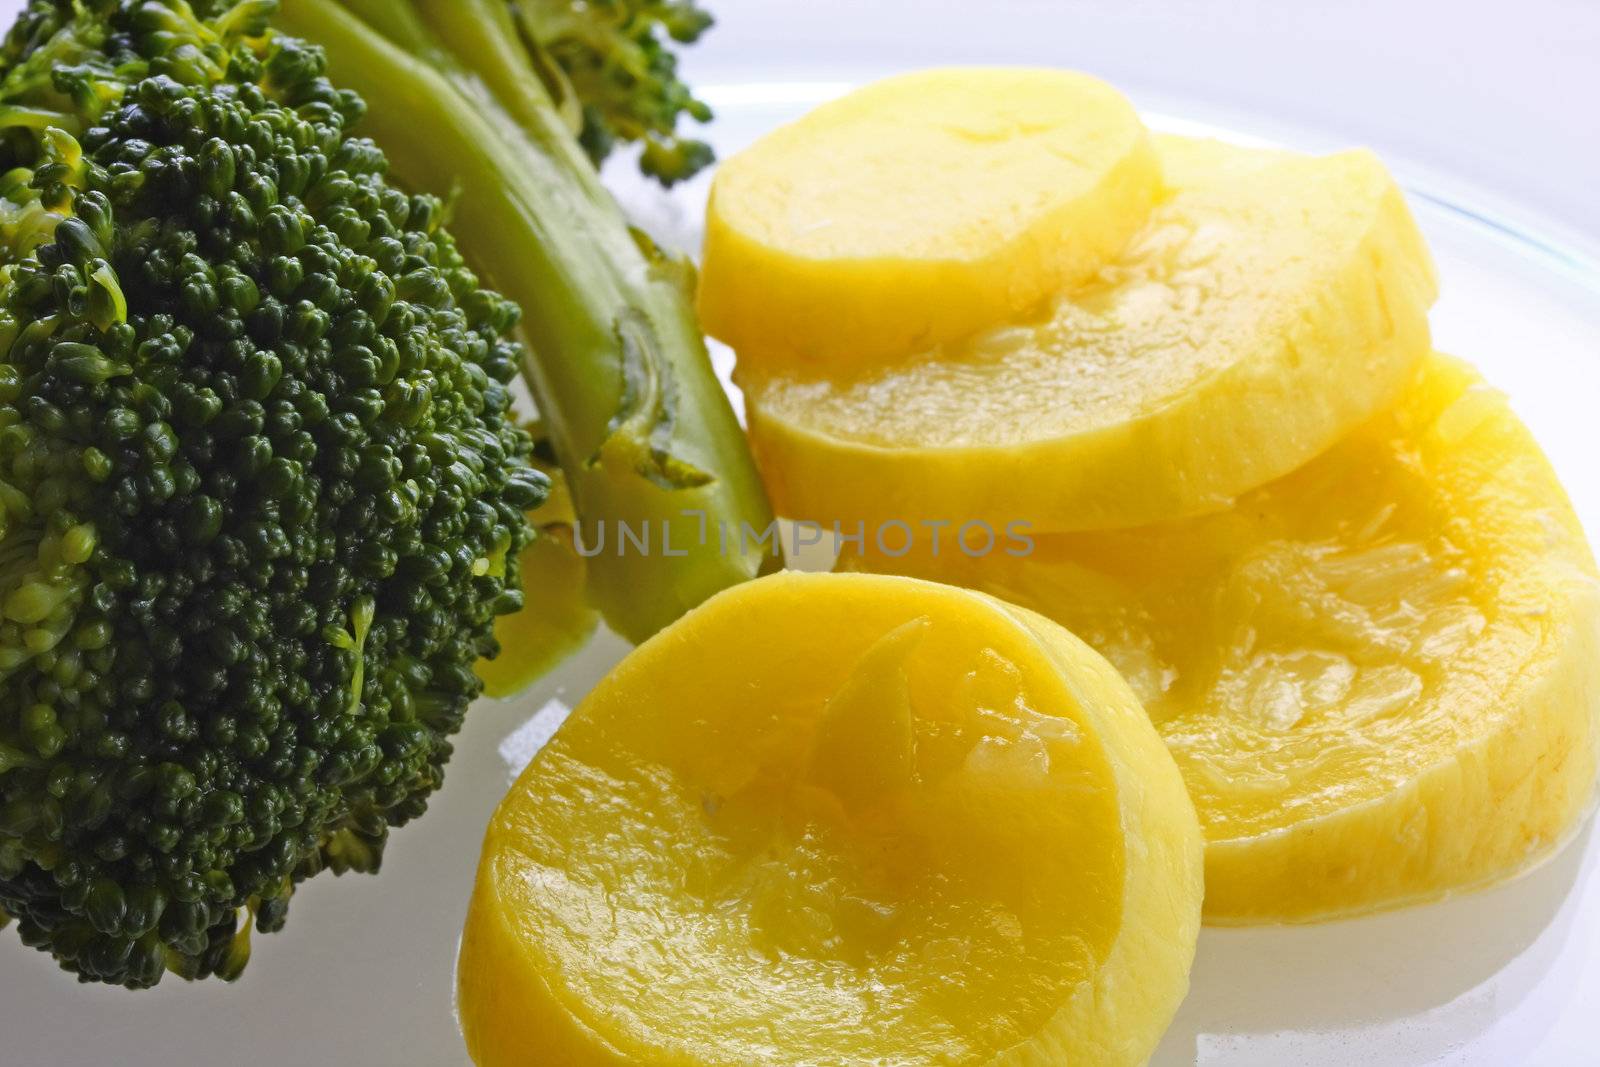 Broccoli and squash on plate, isolated.